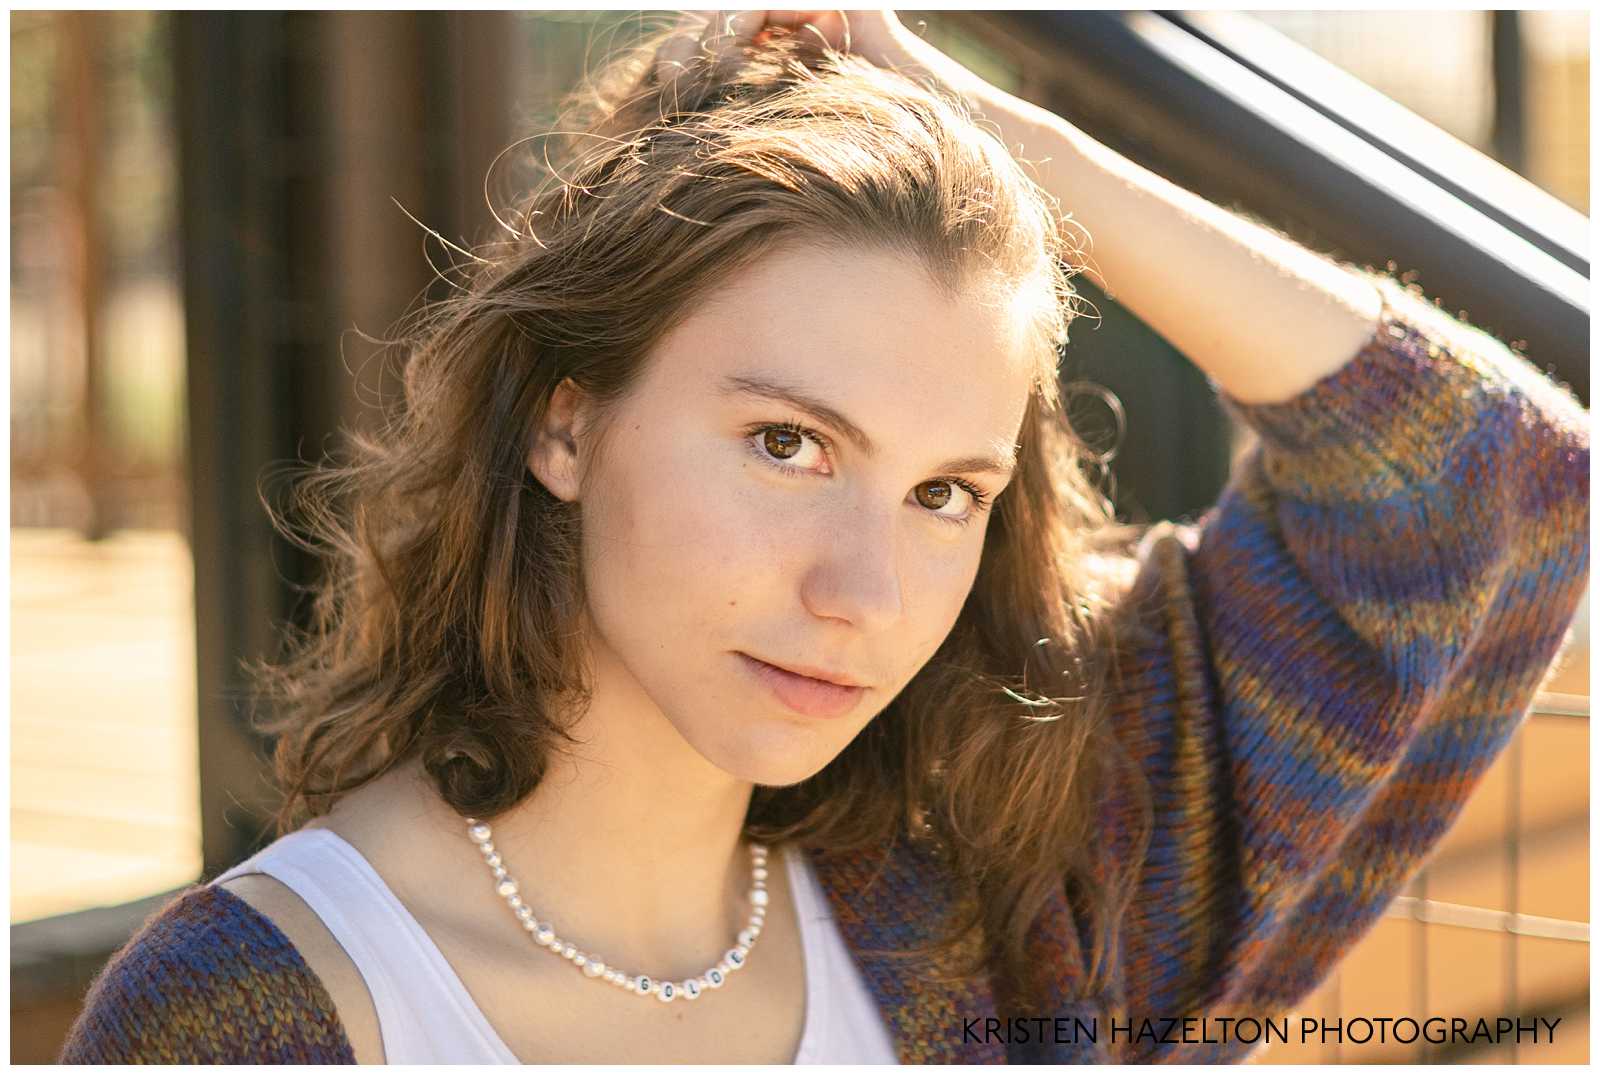 Closeup portrait of a high school senior girl wearing a brown and blue striped cardigan